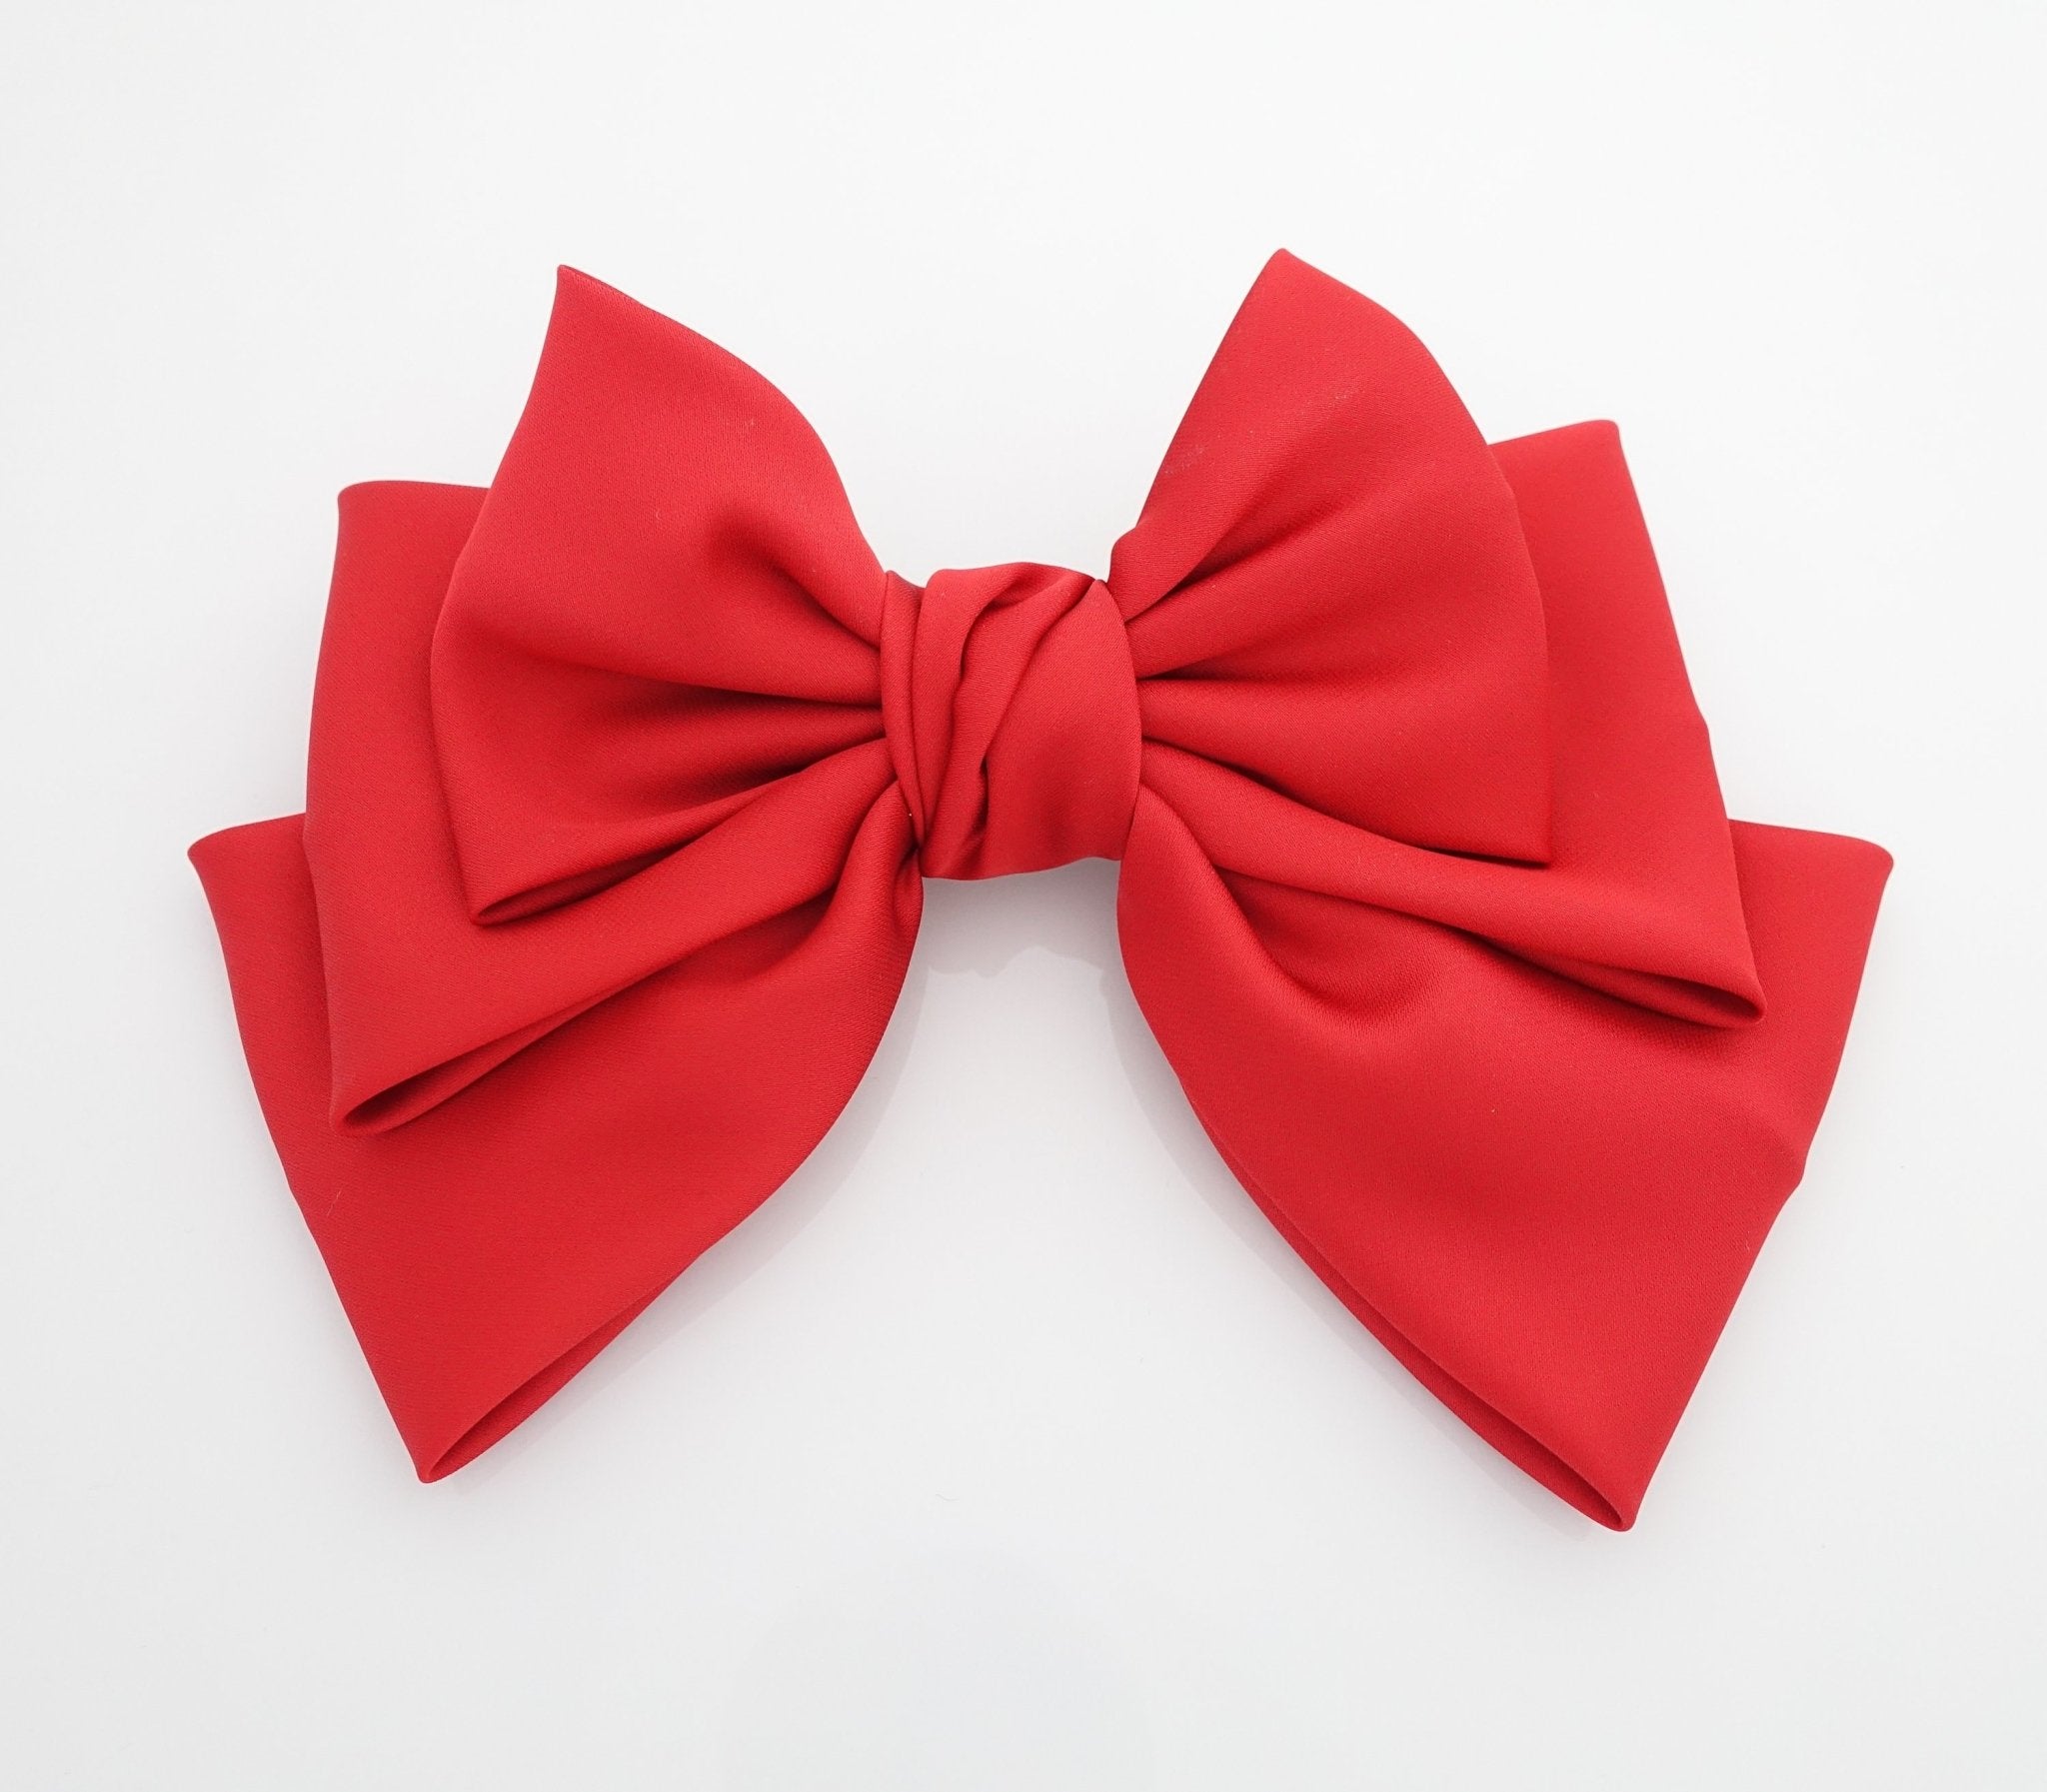 VeryShine claw/banana/barrette Red big satin layered hair bow french barrette Women solid color stylish hair bow